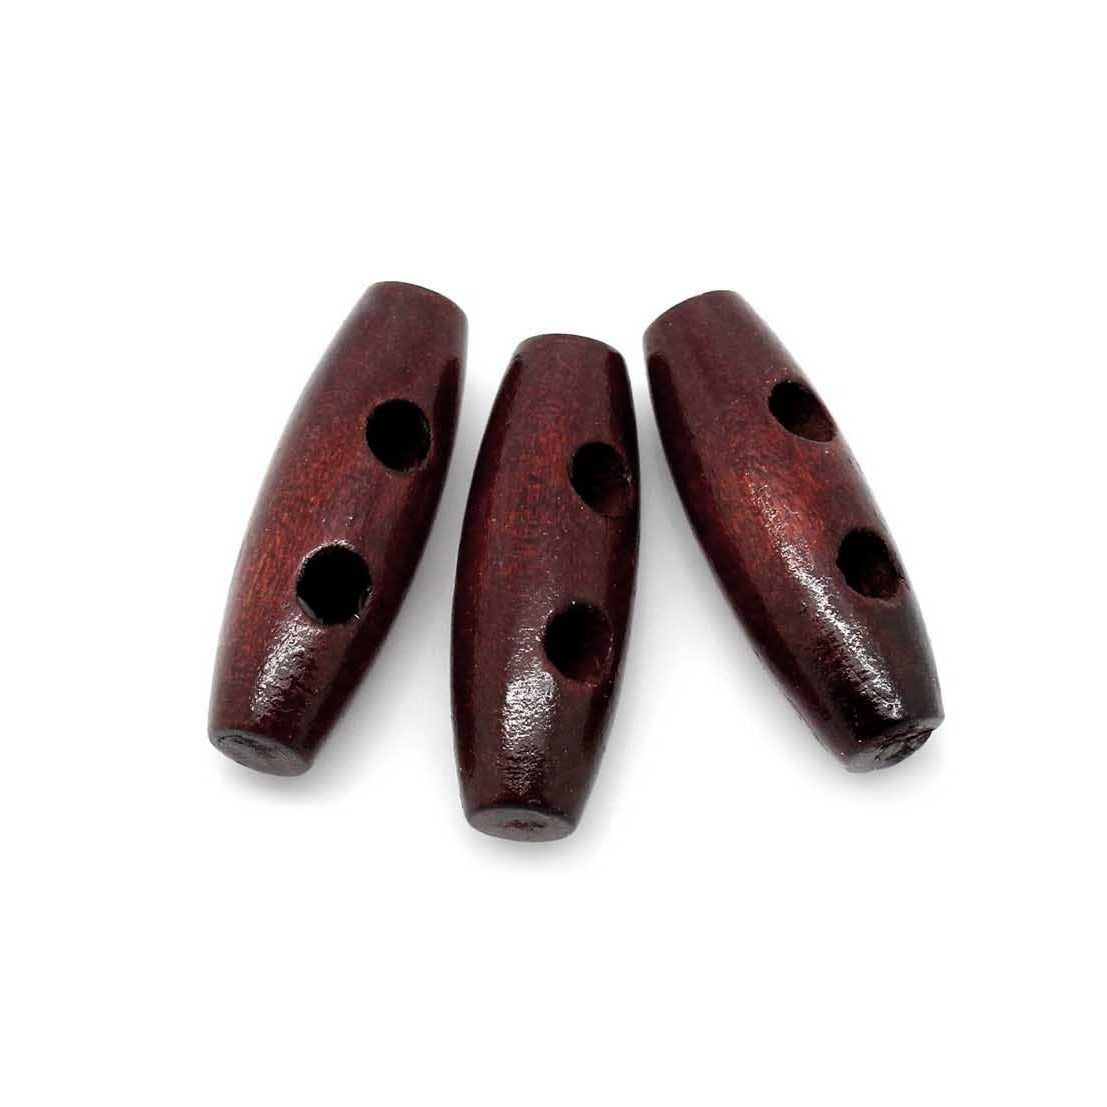 2 Large Toggle Buttons - Wood Dark Brown, Black 6cm (2 3/8)